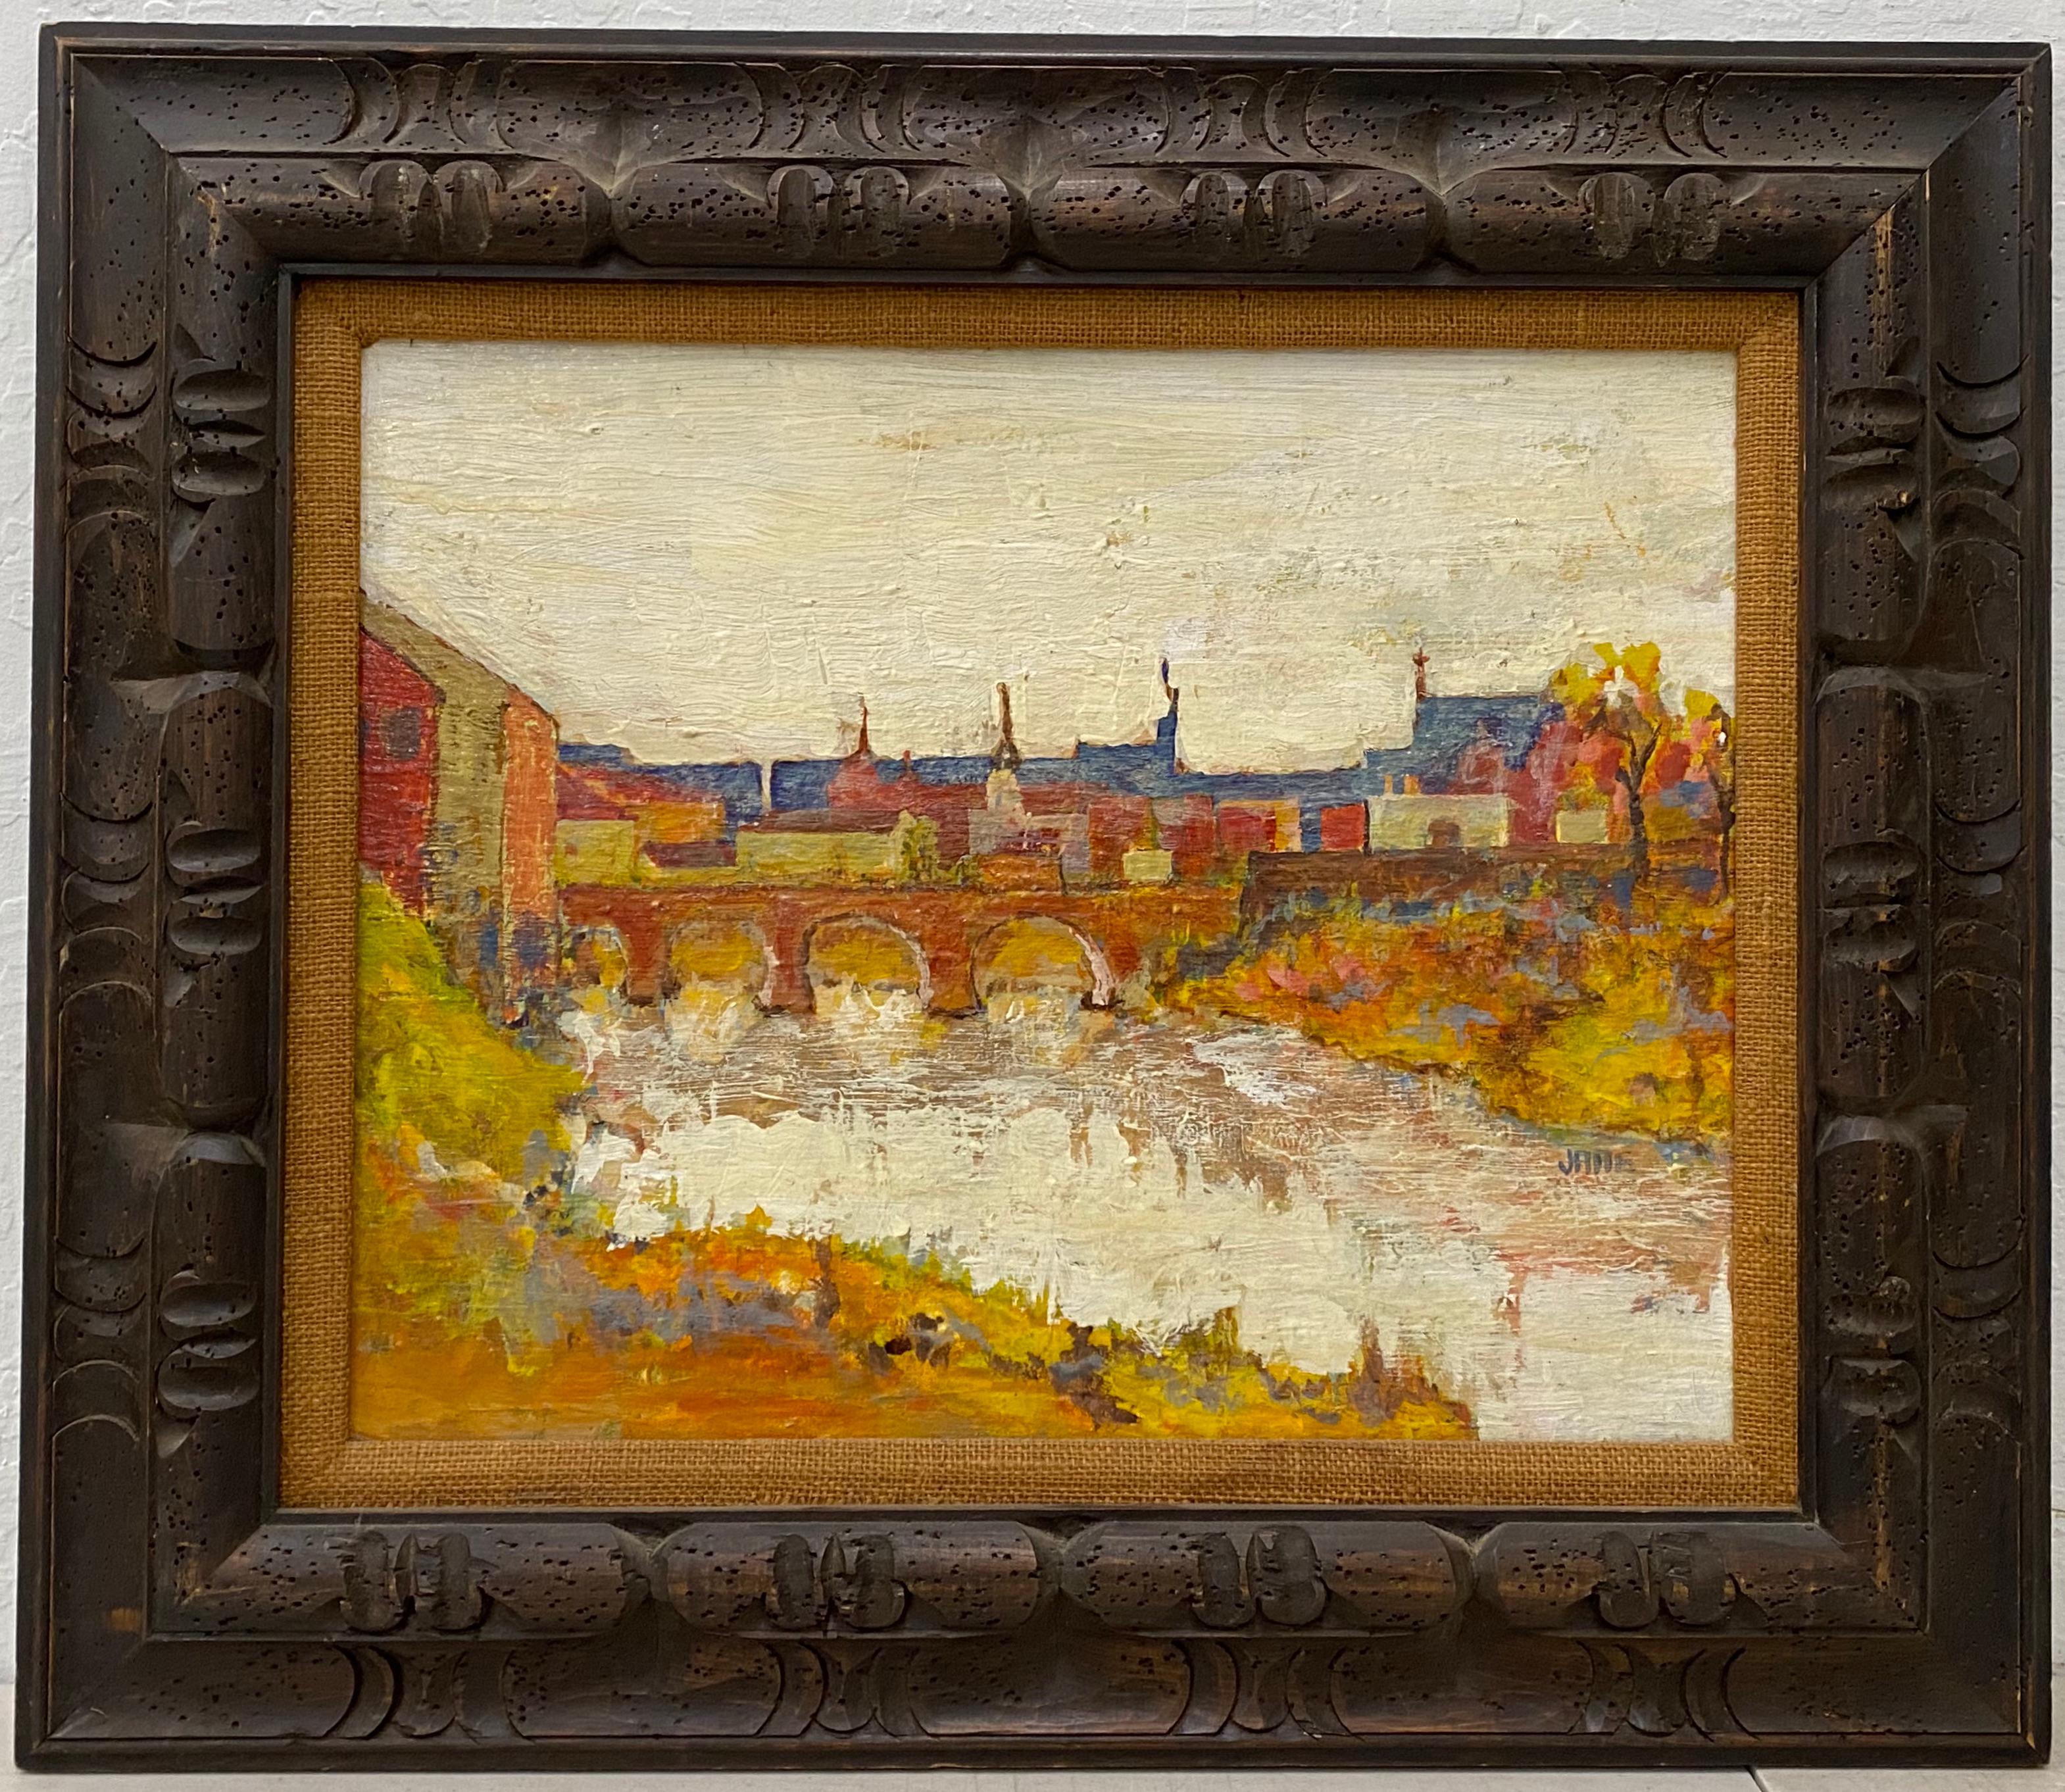 Unknown Landscape Painting - Mid 20th Century European Townscape by Jane C.1950